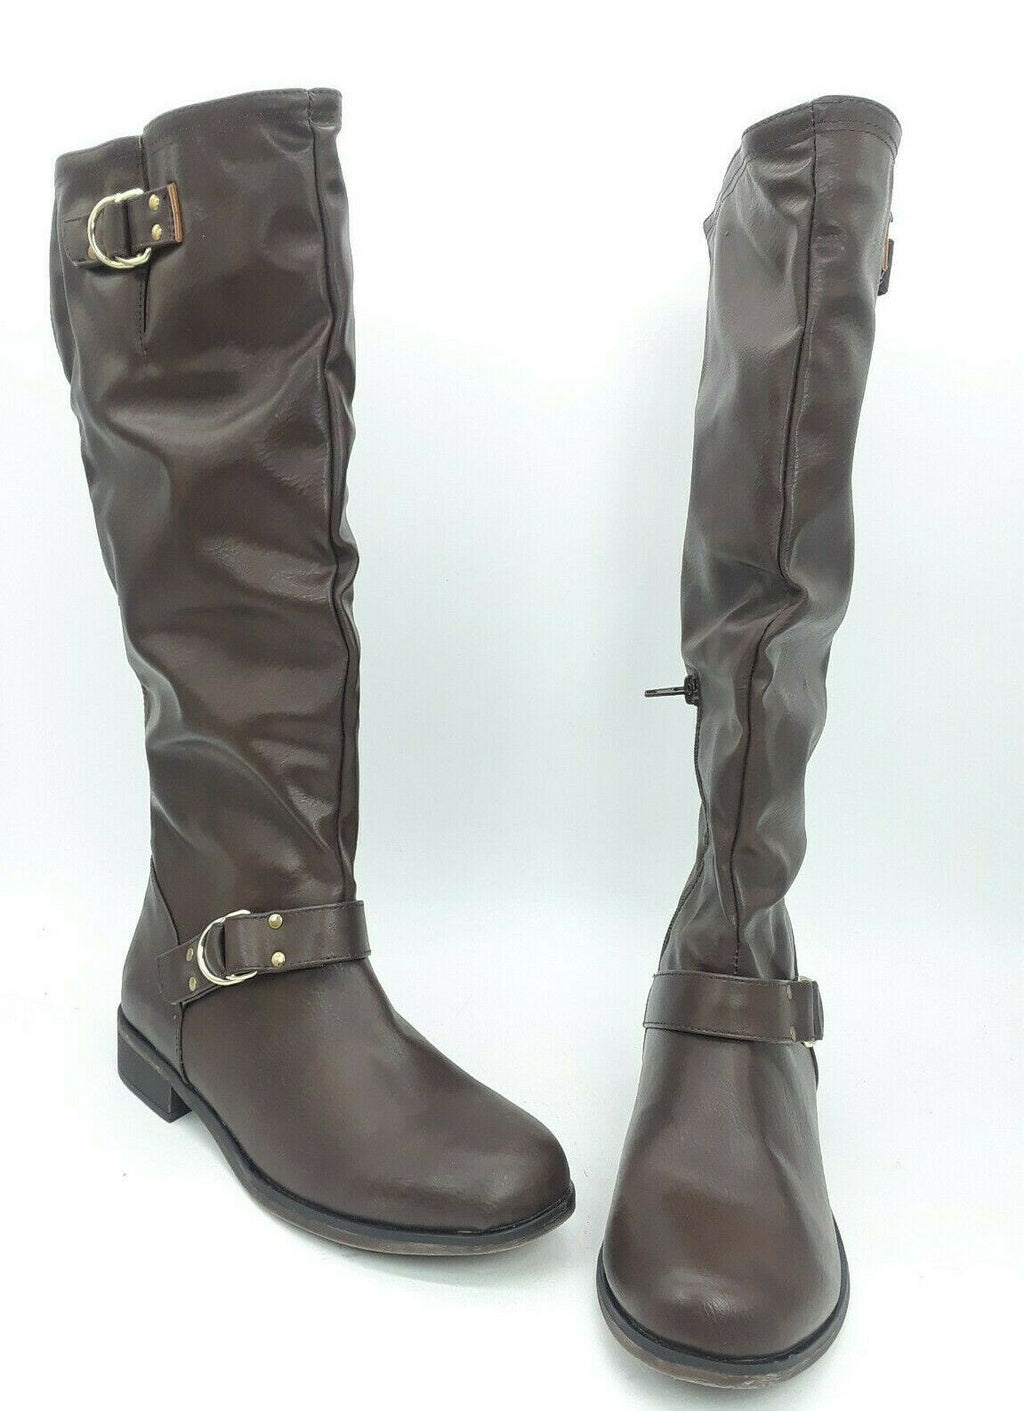 xoxo minkler wide calf riding boots